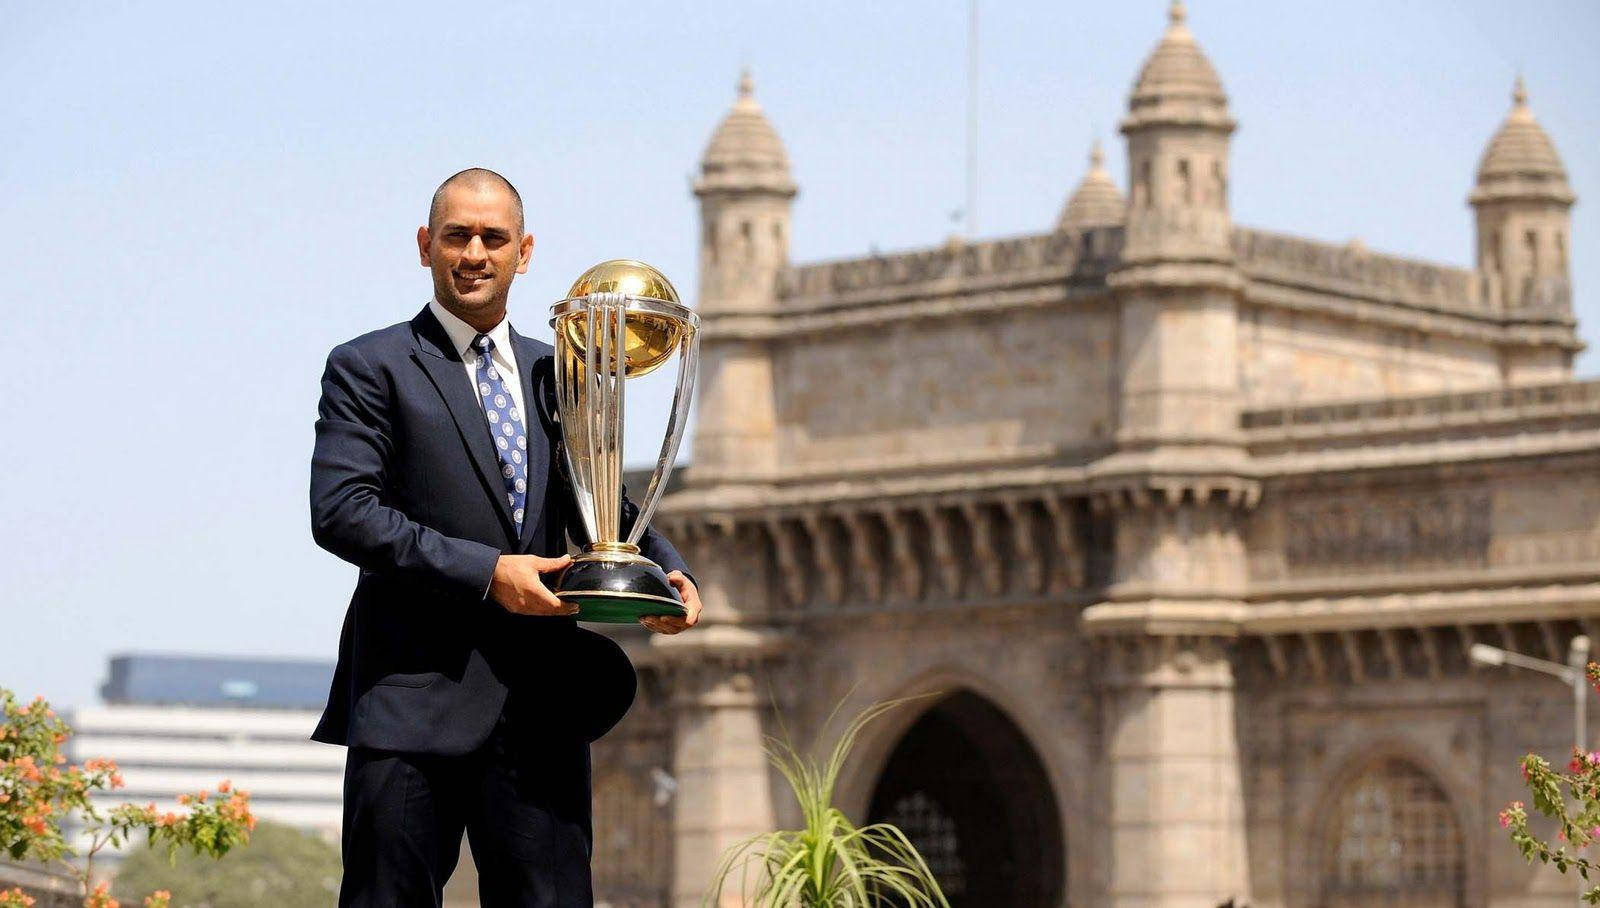 Ms Dhoni With Golden Championship Trophy Background